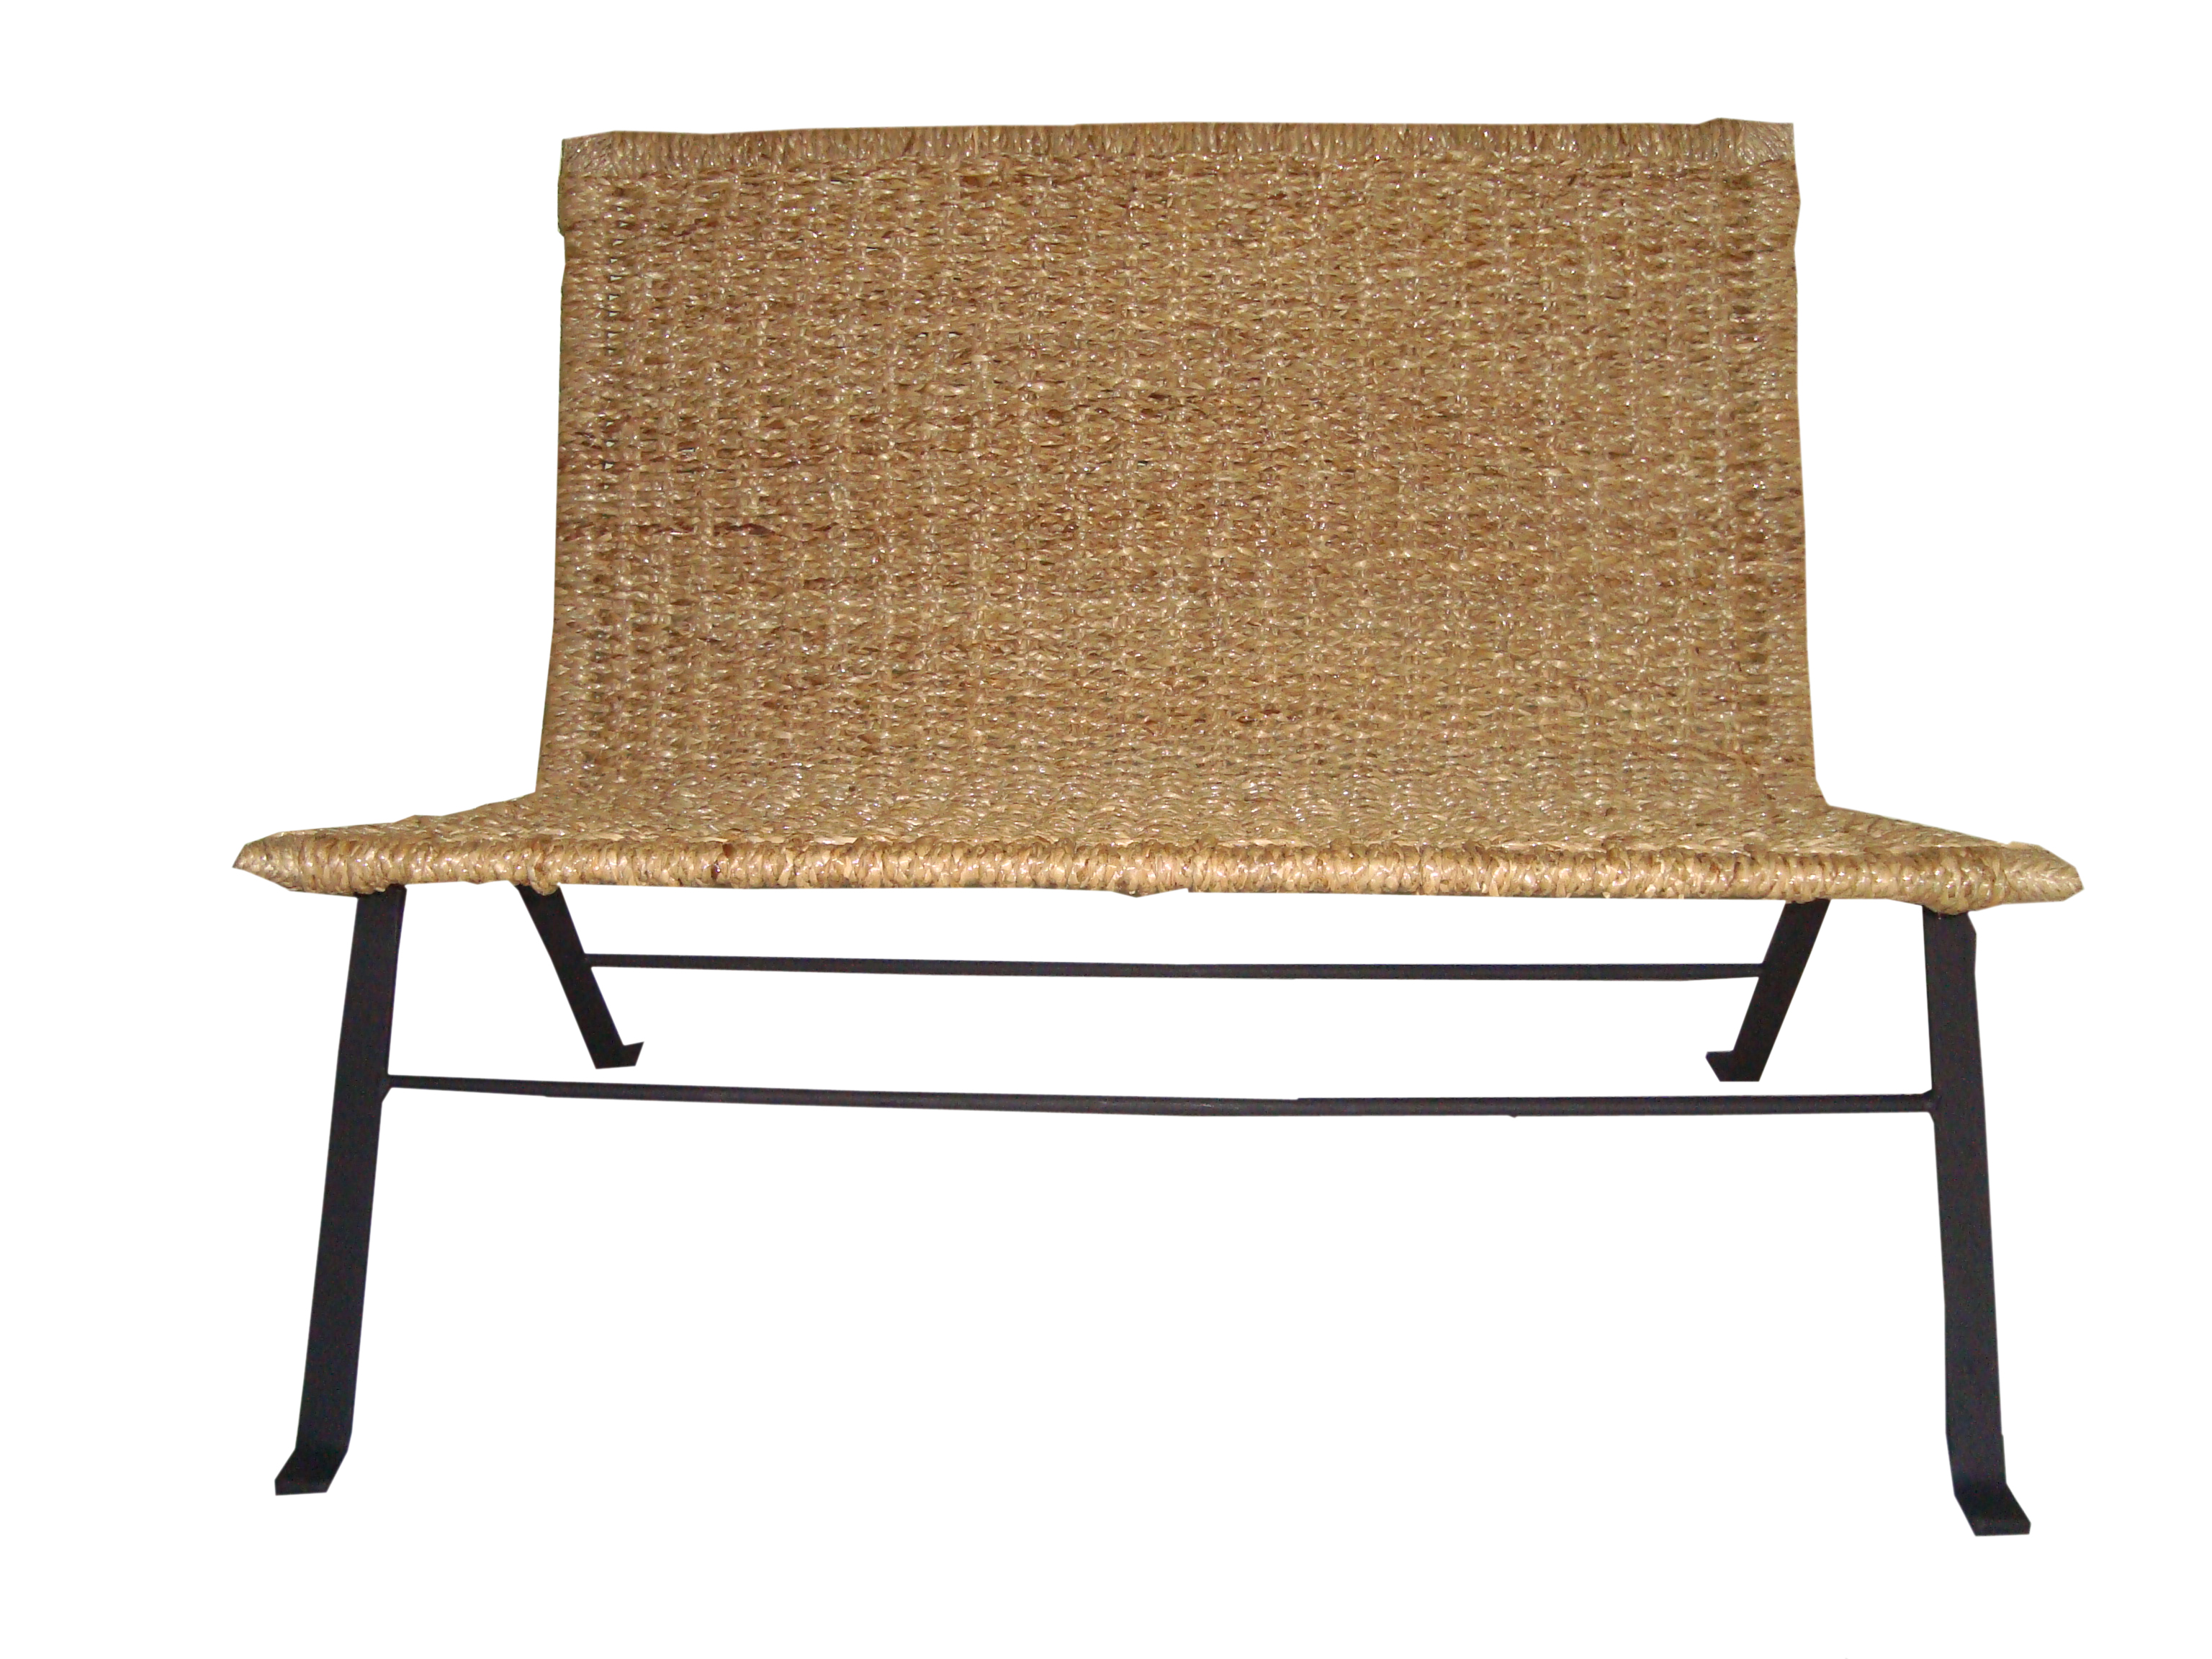 Two seater lounge chair made of reed with durable metal legs